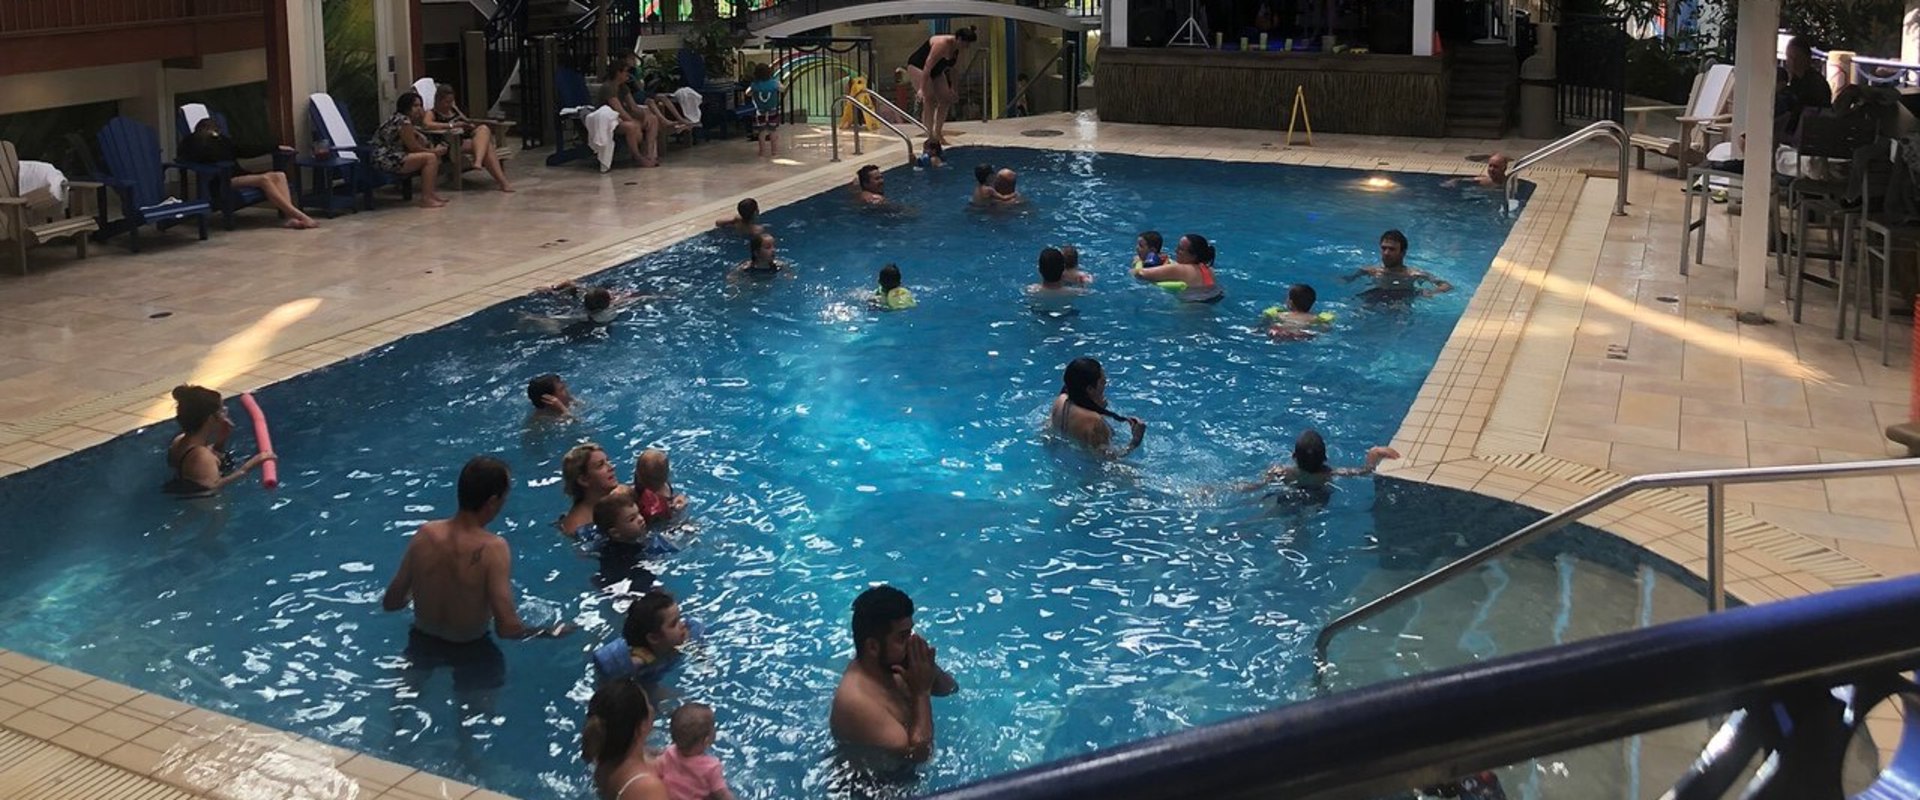 Are hotel pools open in quebec?